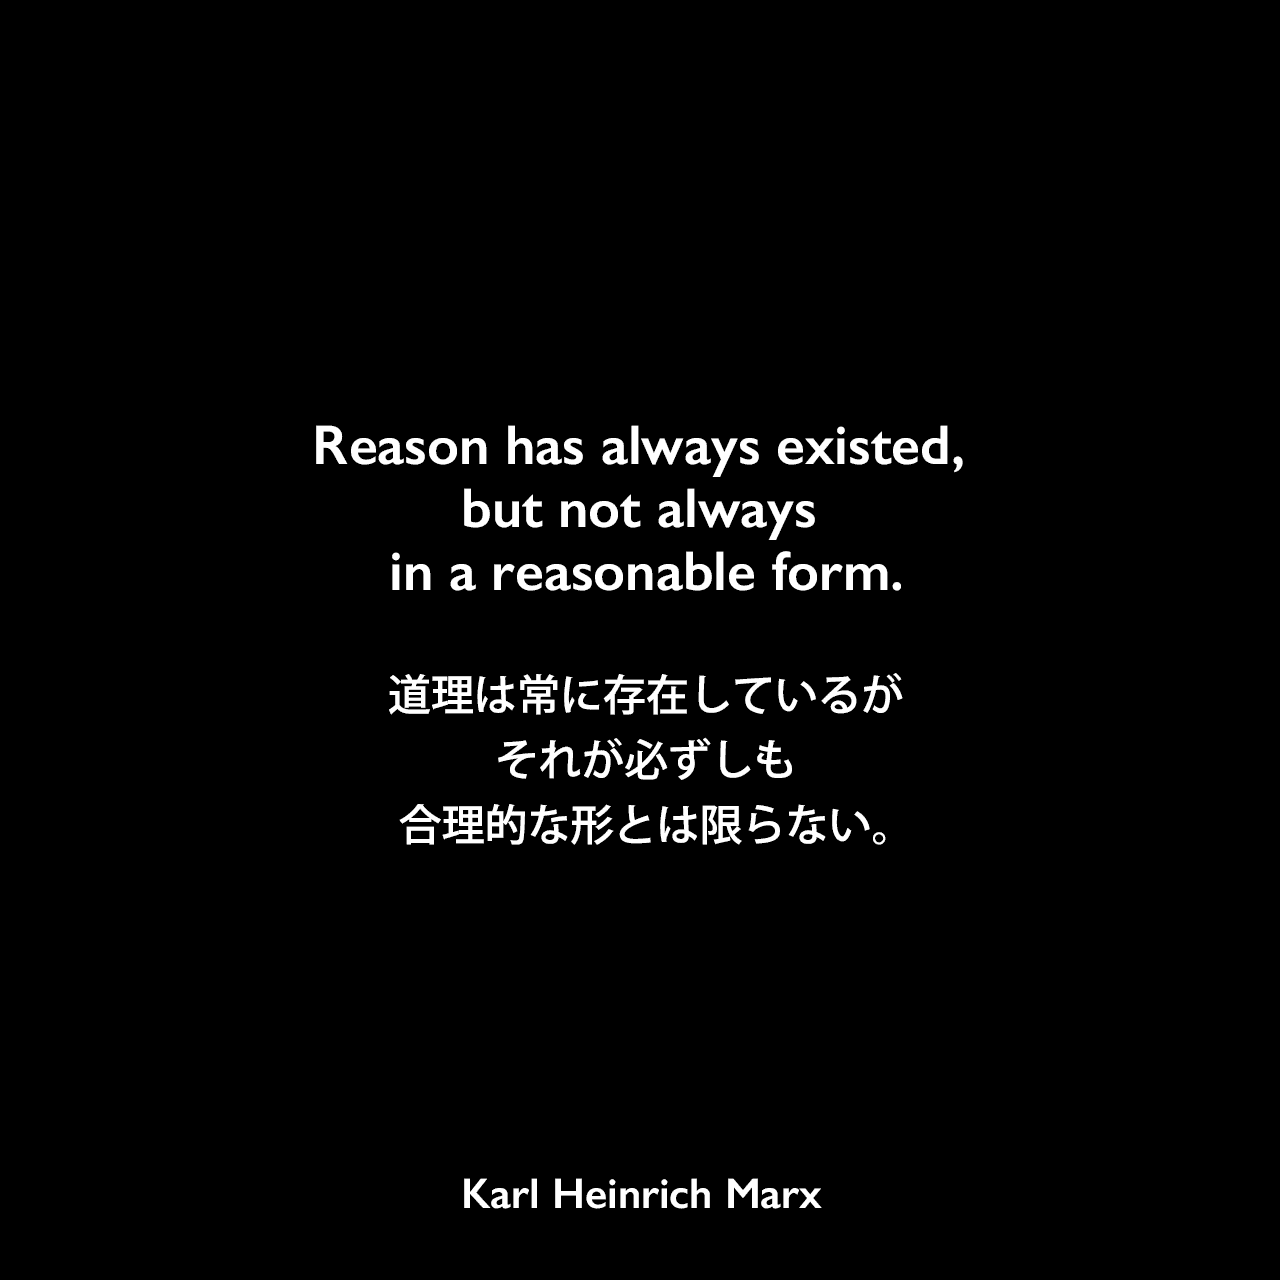 Reason has always existed, but not always in a reasonable form.道理は常に存在しているが、それが必ずしも合理的な形とは限らない。Karl Heinrich Marx